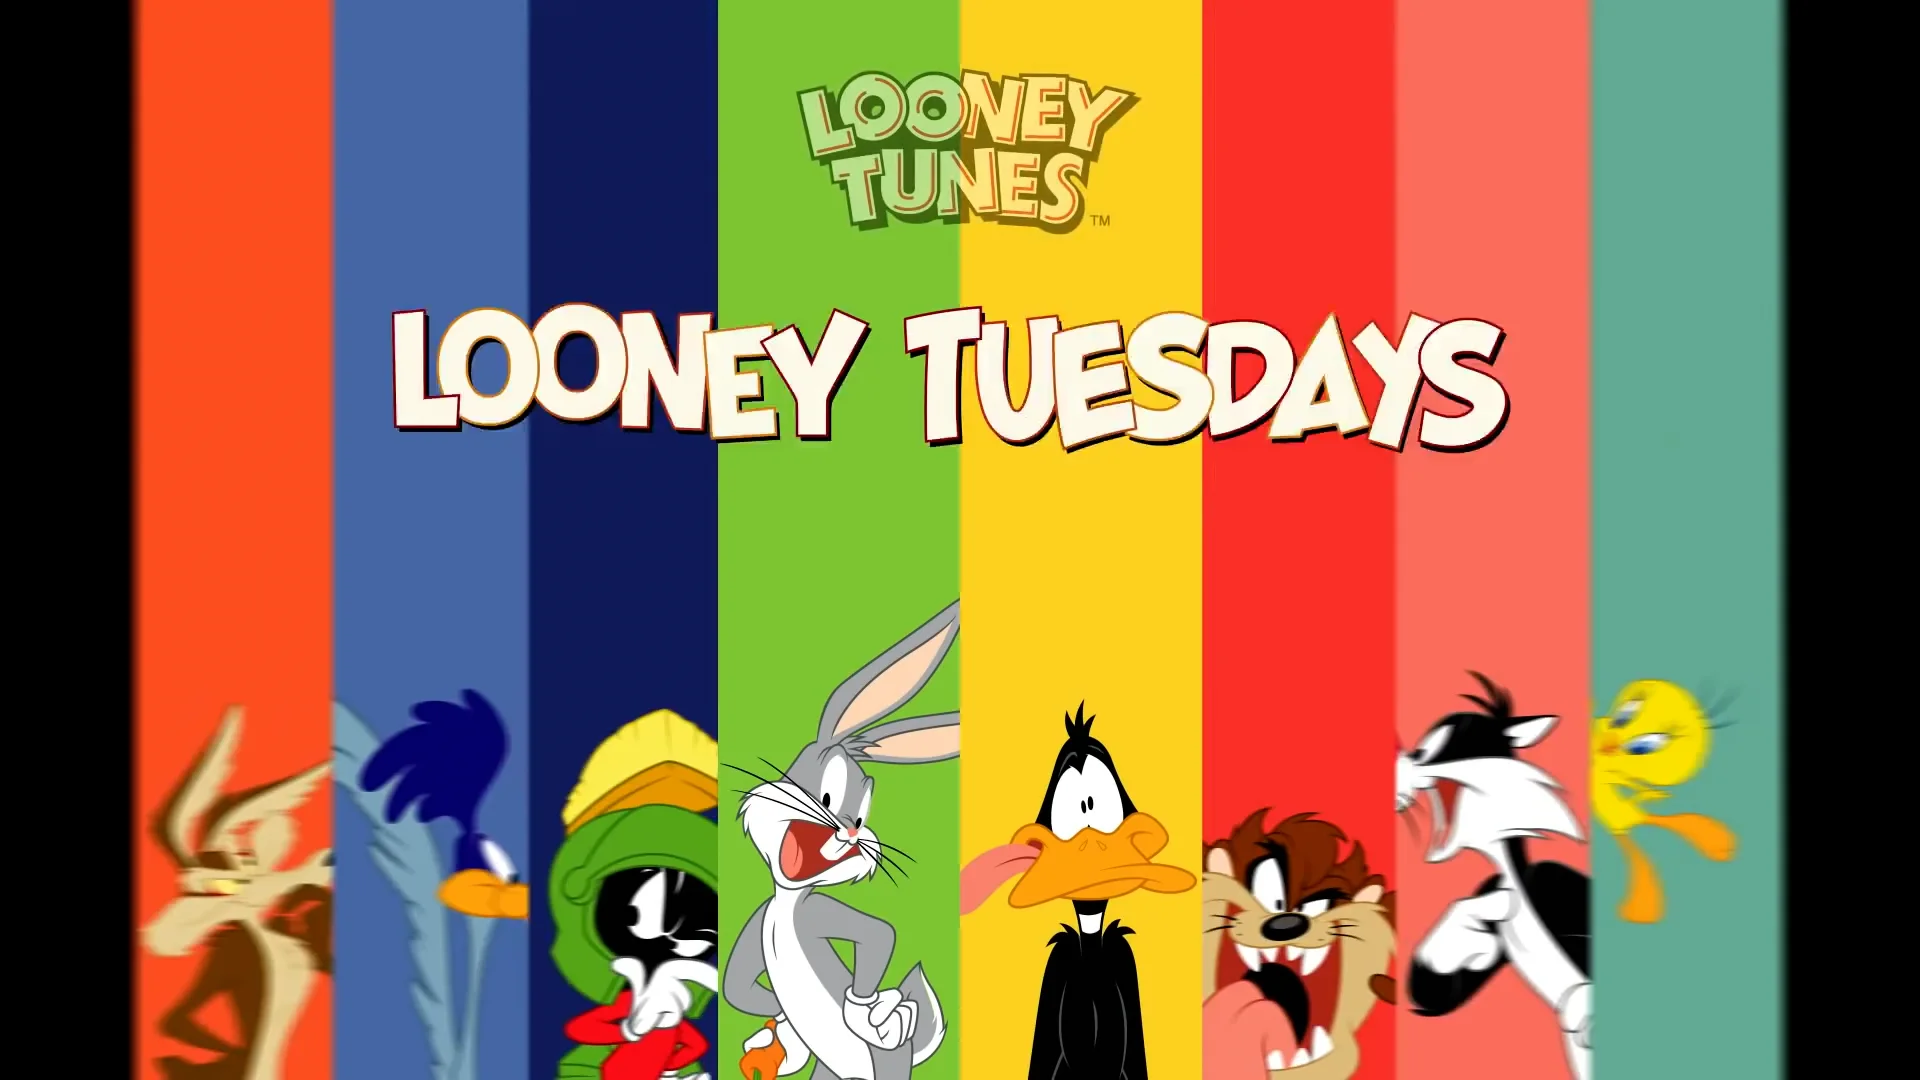 Looney Tuesdays, Iconic Duo: Wile E. Coyote & Road Runner, Looney Tunes